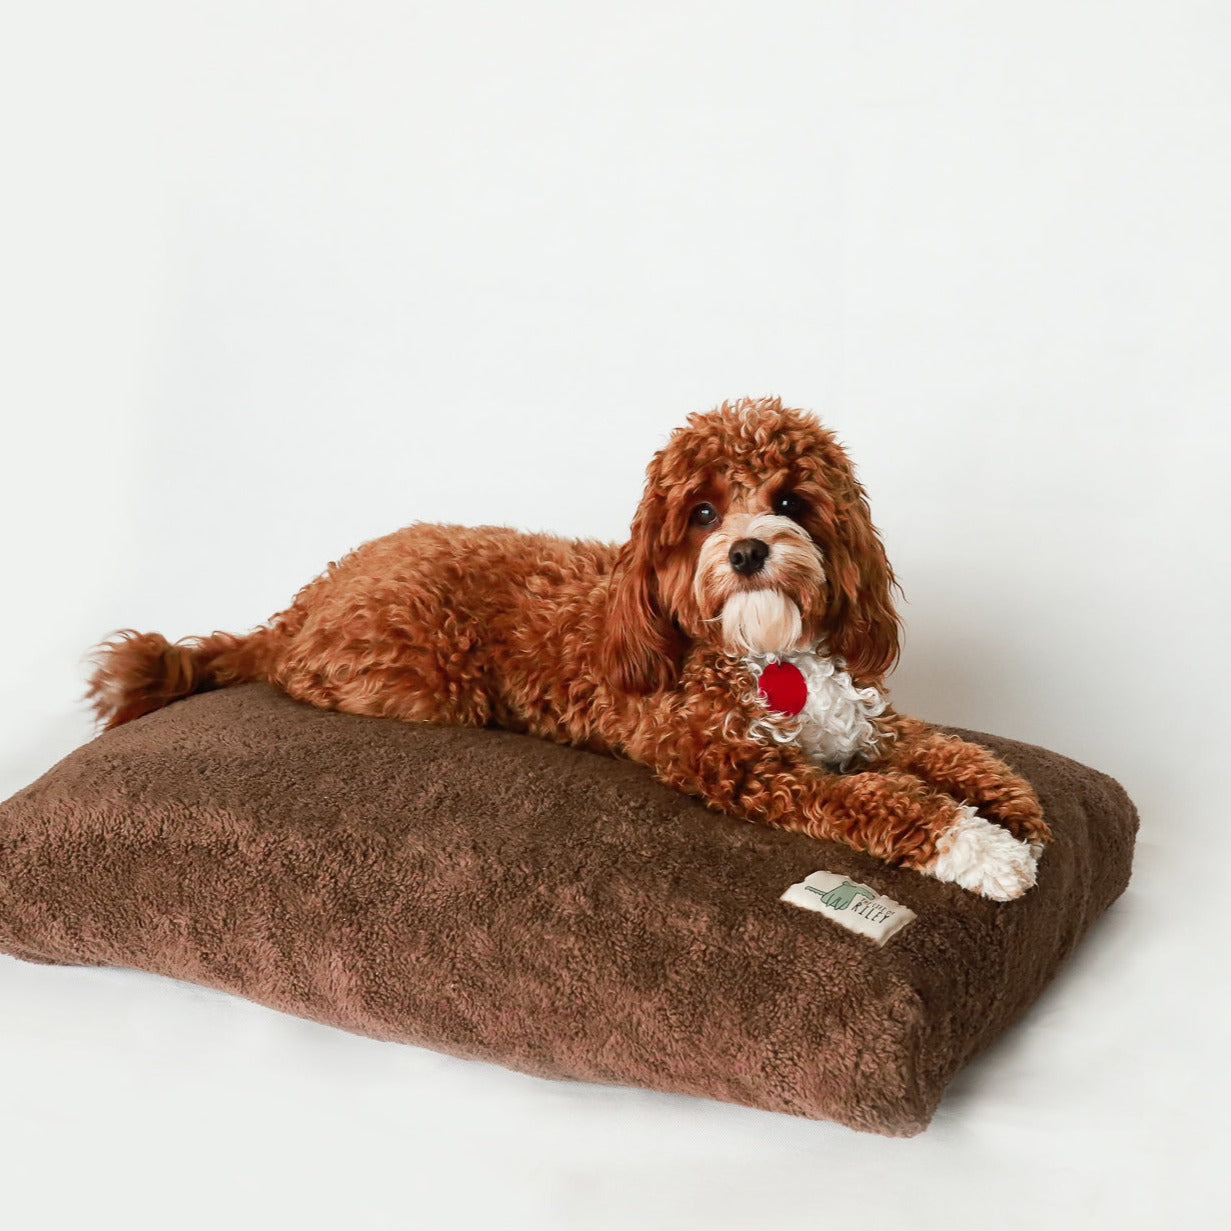 Organic Teddy - Elastic Mattress Cover Life of Riley Pet Products  The Life of Riley